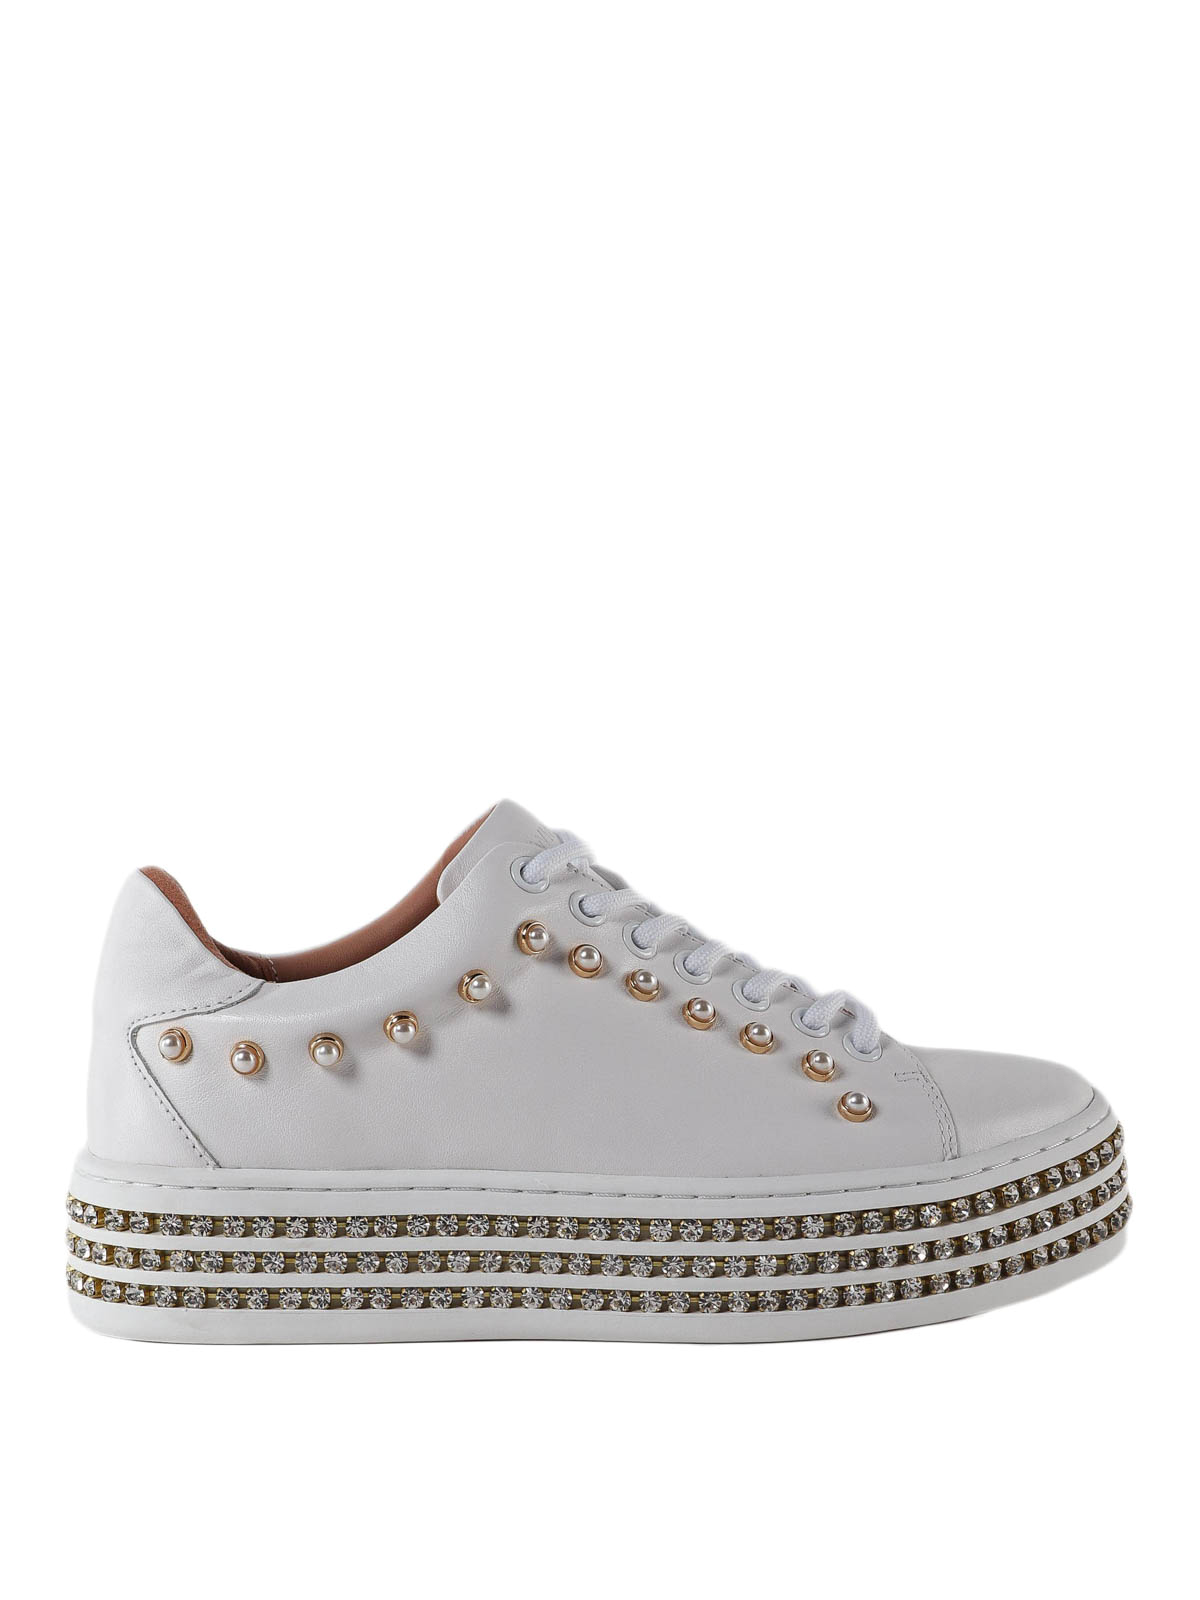 sneakers bianche con perle